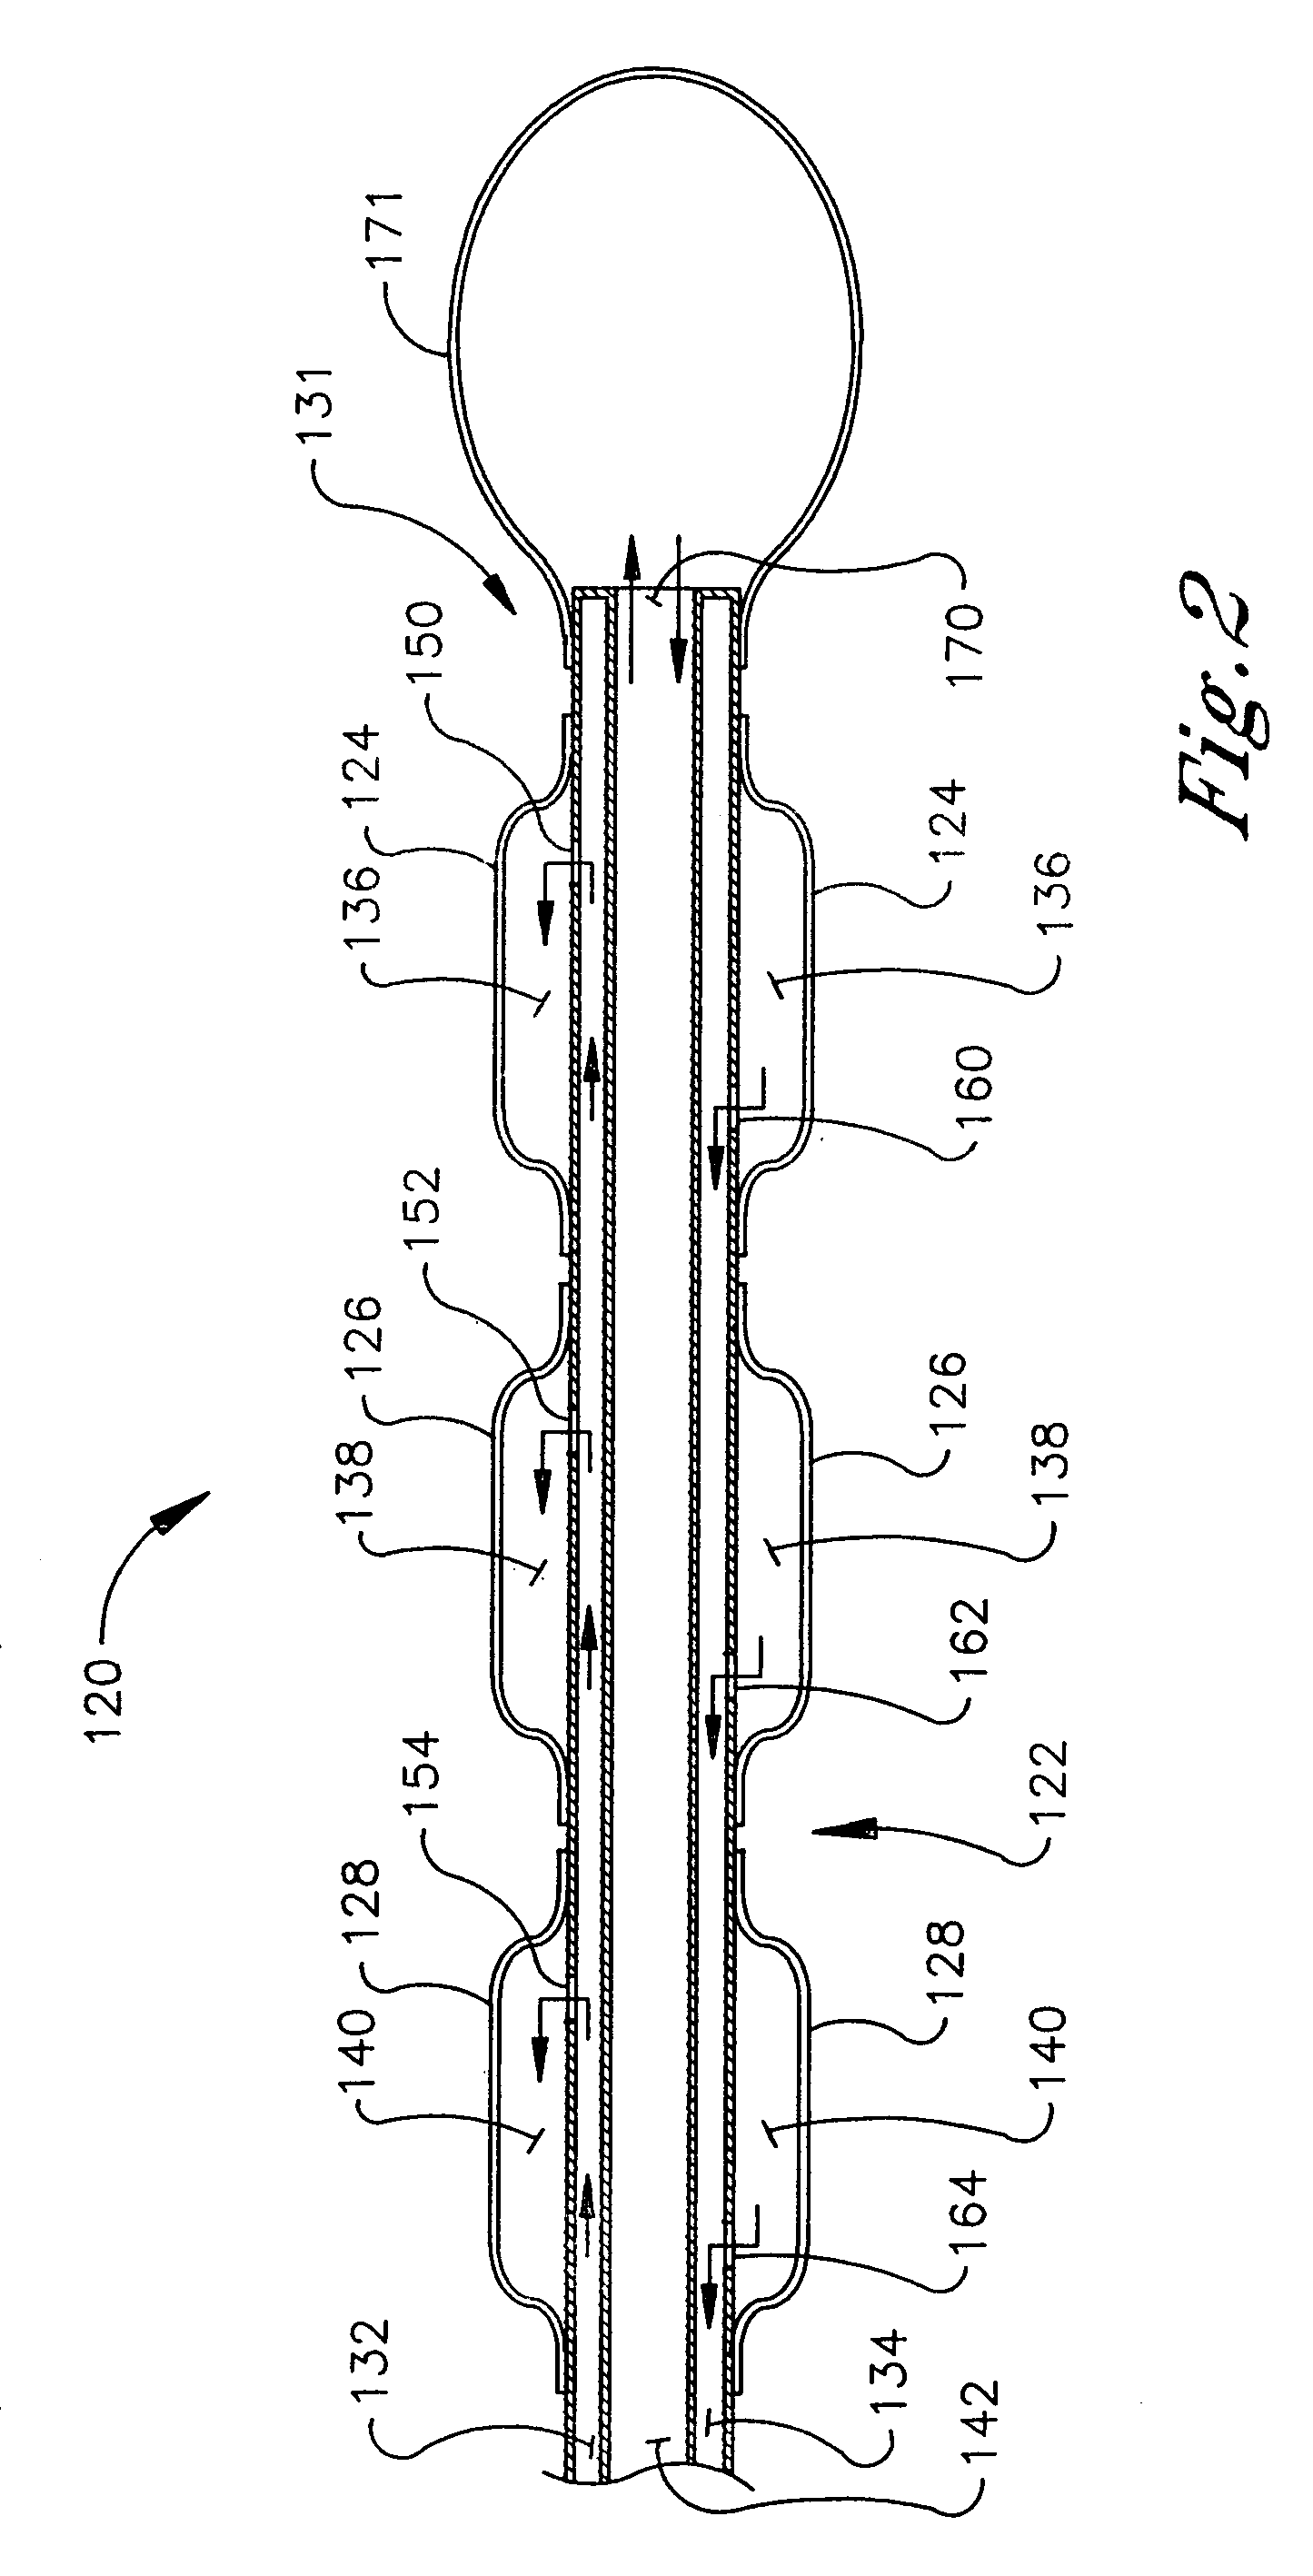 Cardiovascular intra aortic balloon pump catheter with heat exchange function and methods of use